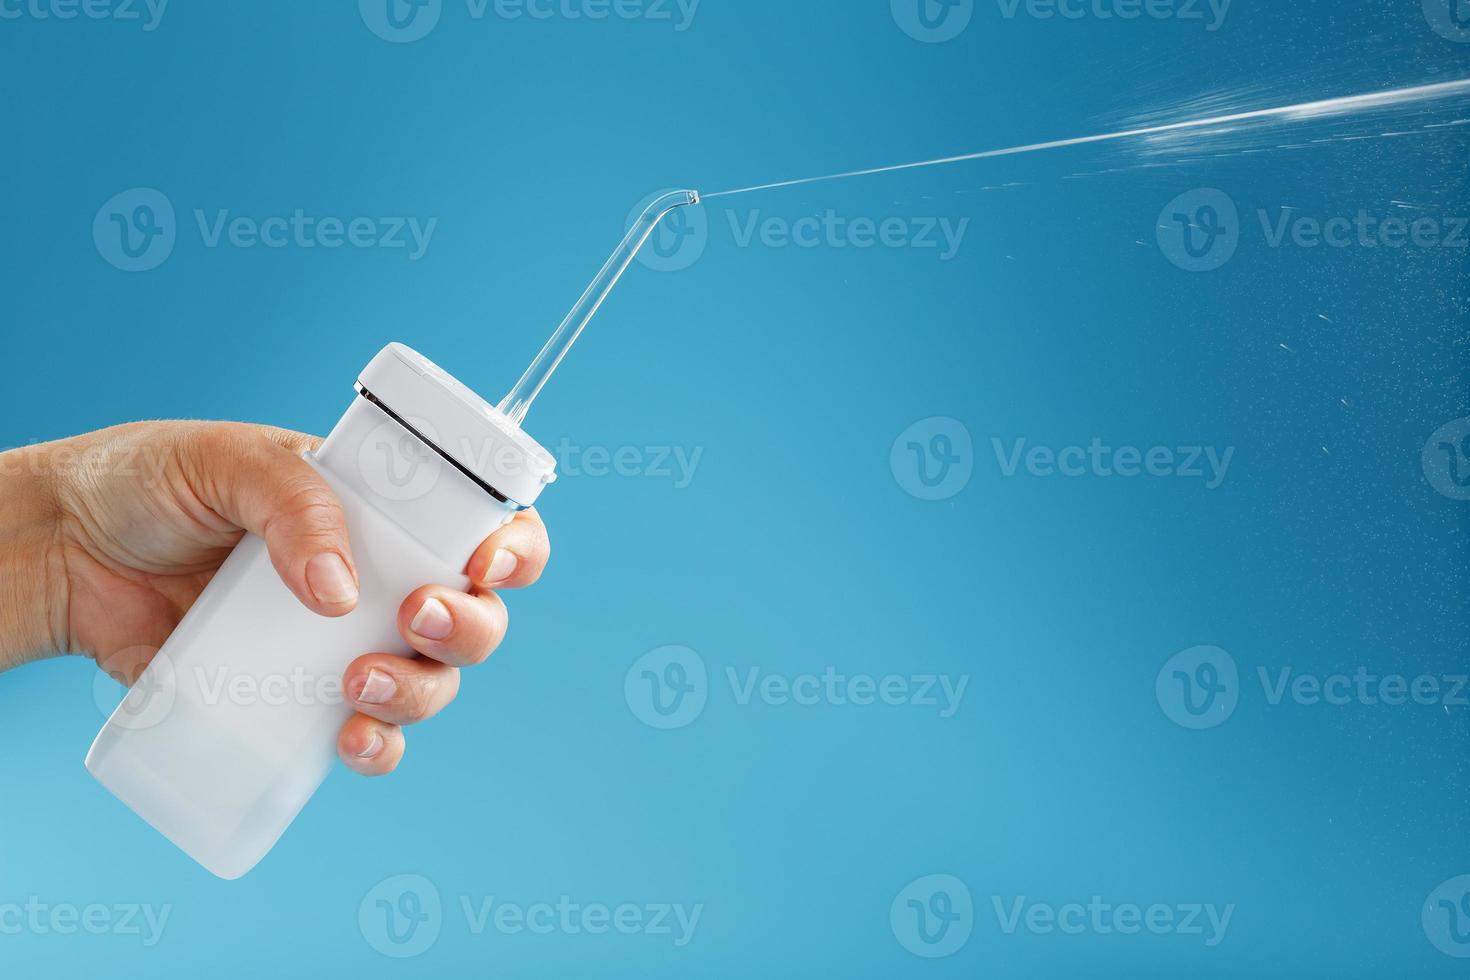 Irrigator in hand for cleaning the mouth with a shot of water jet on a blue background photo